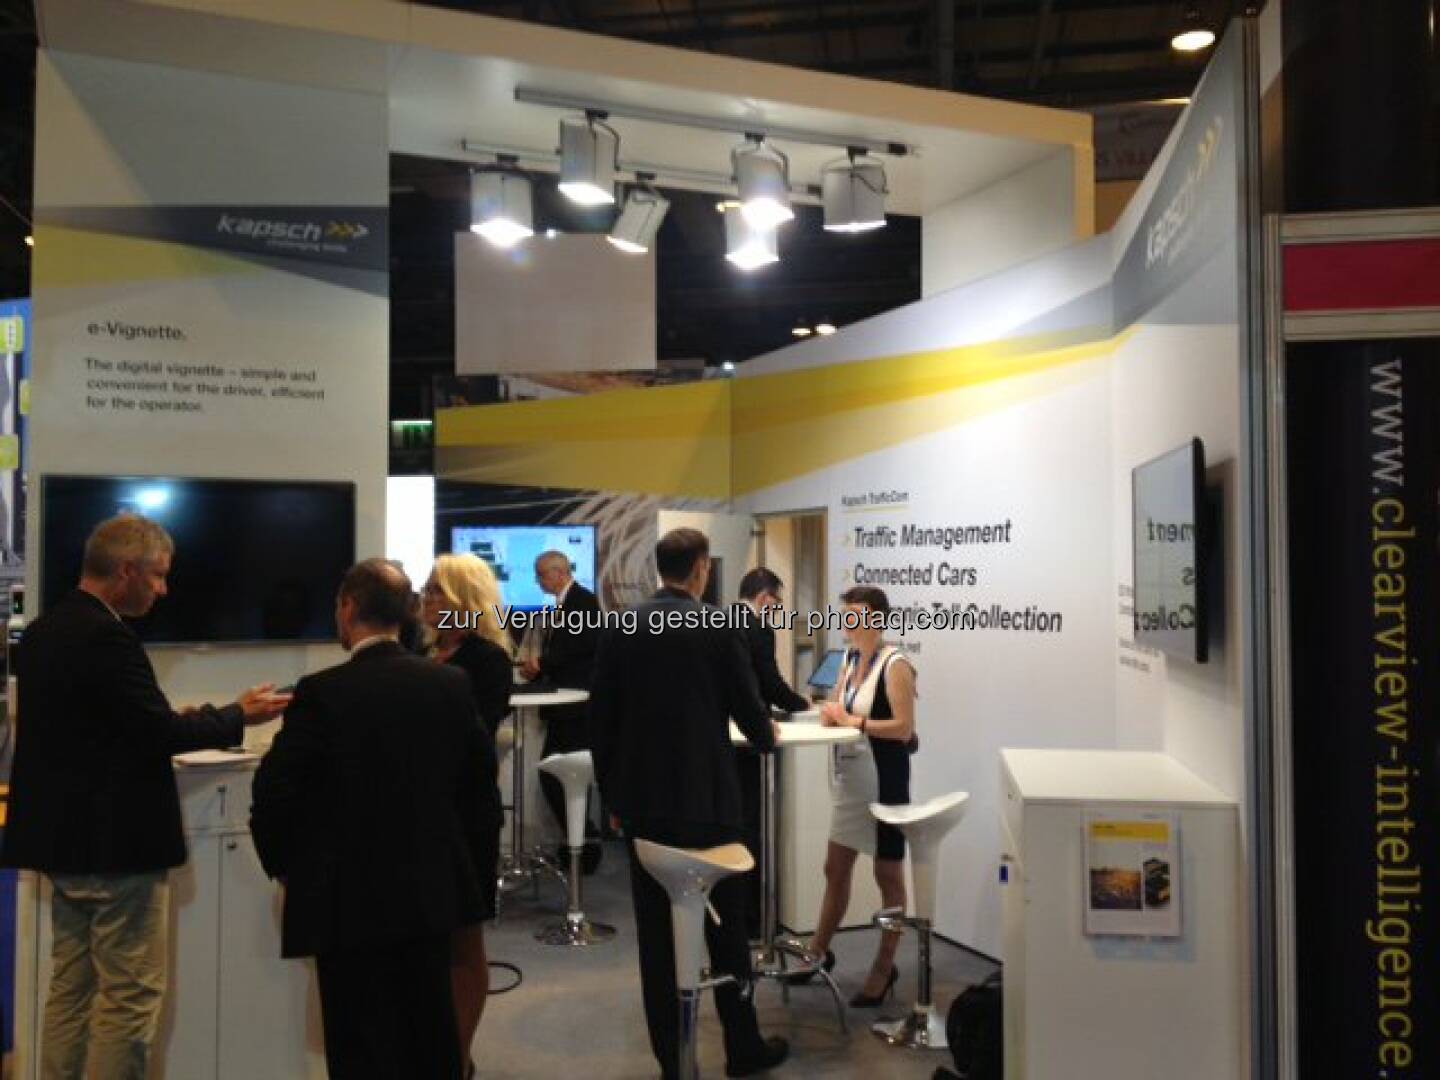 Some impressions from our booth at the #ITSGlasgow16. http://twitter.com/kapschnet/status/740454565343055872/photo/1  Source: http://twitter.com/kapschnet